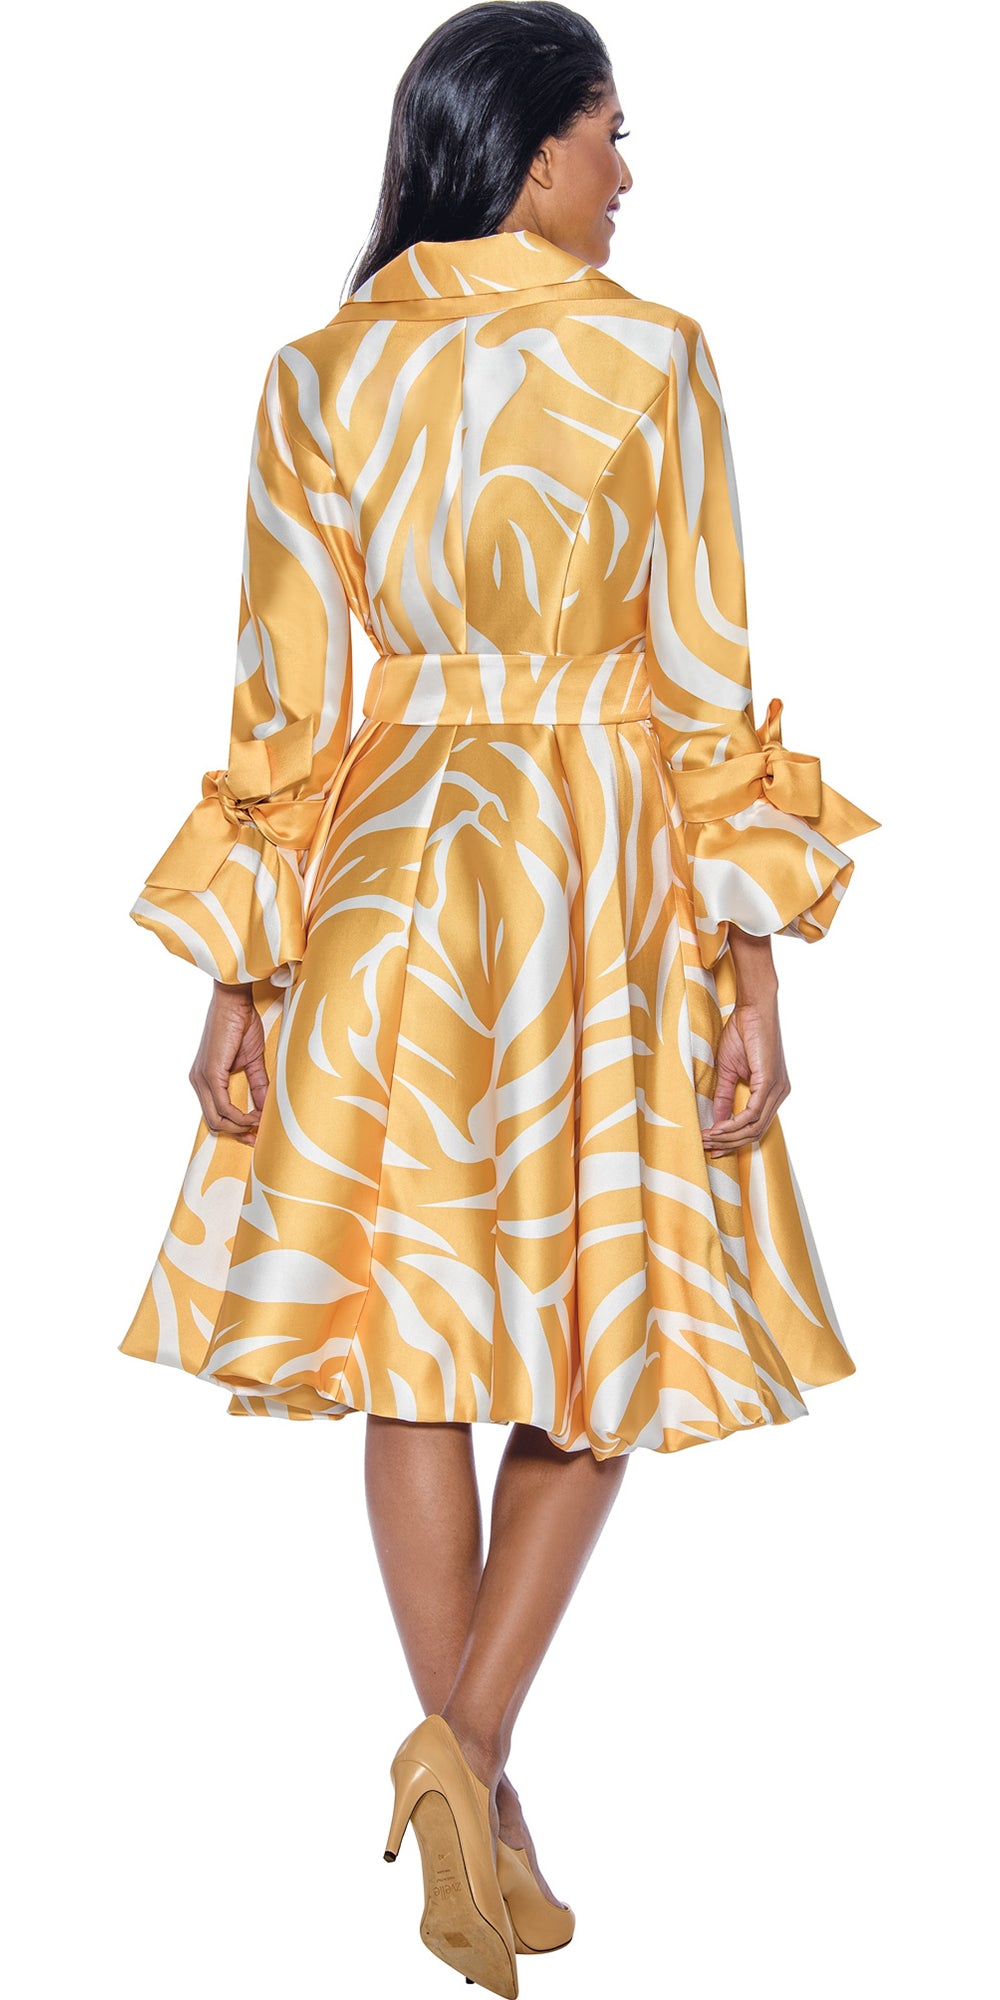 Dresses by Nubiano - 1771 - Yellow White - Print Button-up Dress